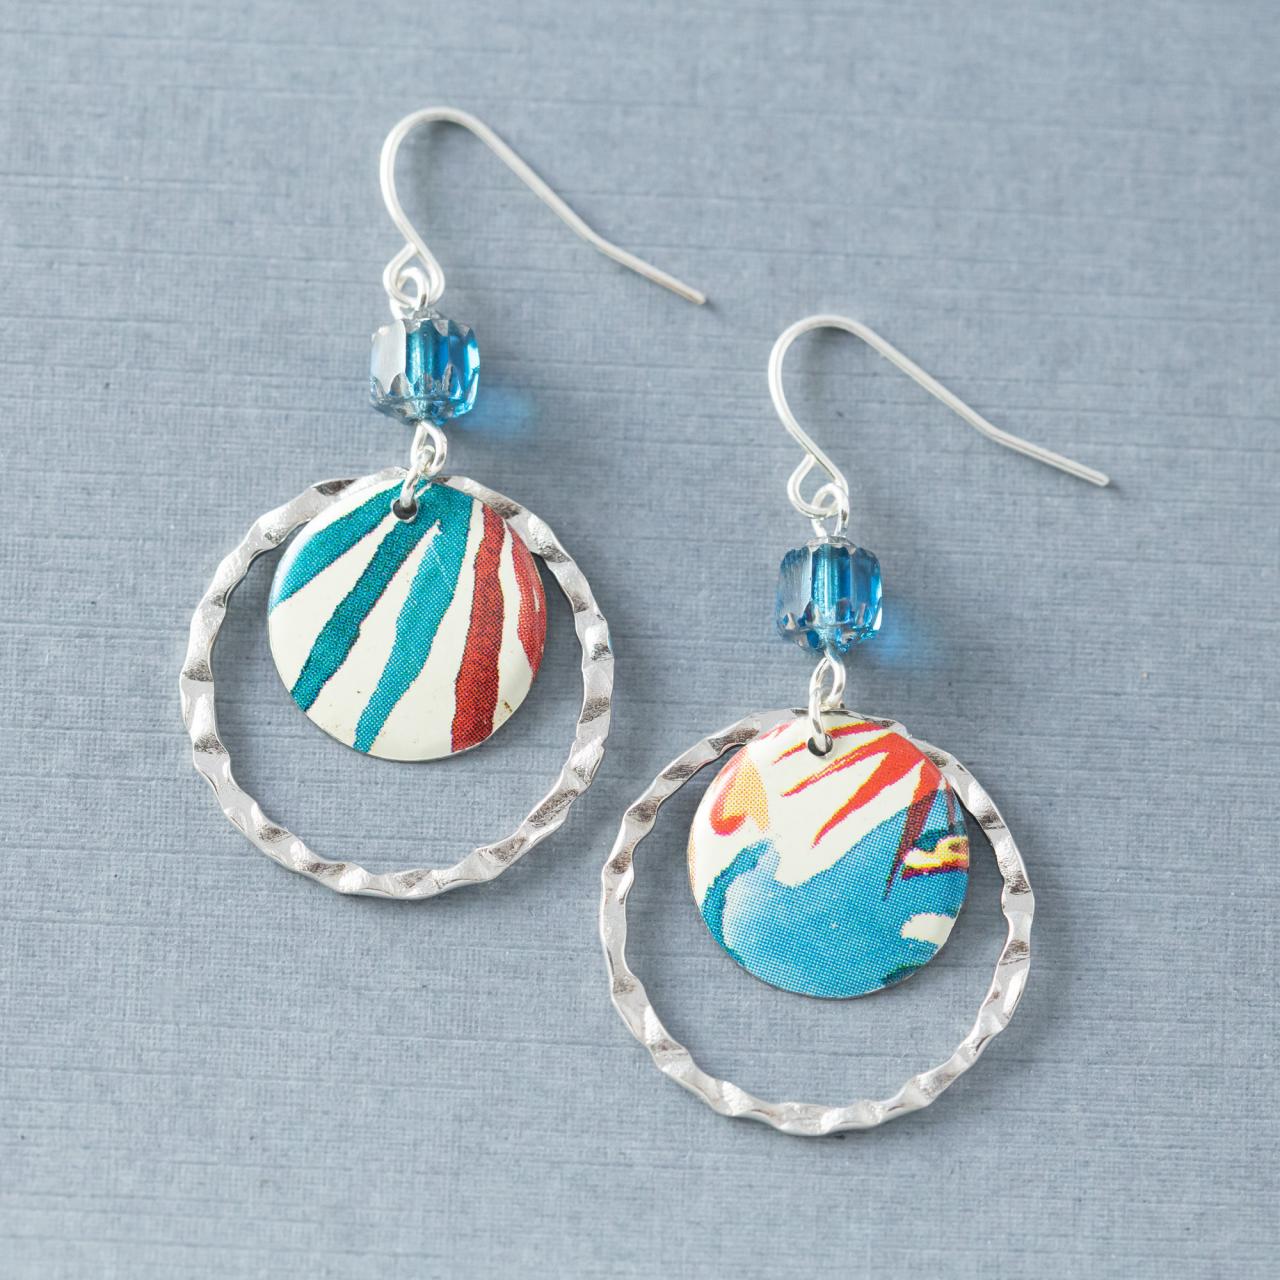 Colorful Boho Artist Tin Dangle Earrings With Silver Tone Hoops And Blue Czech Glass Beads, Tin Jewelry